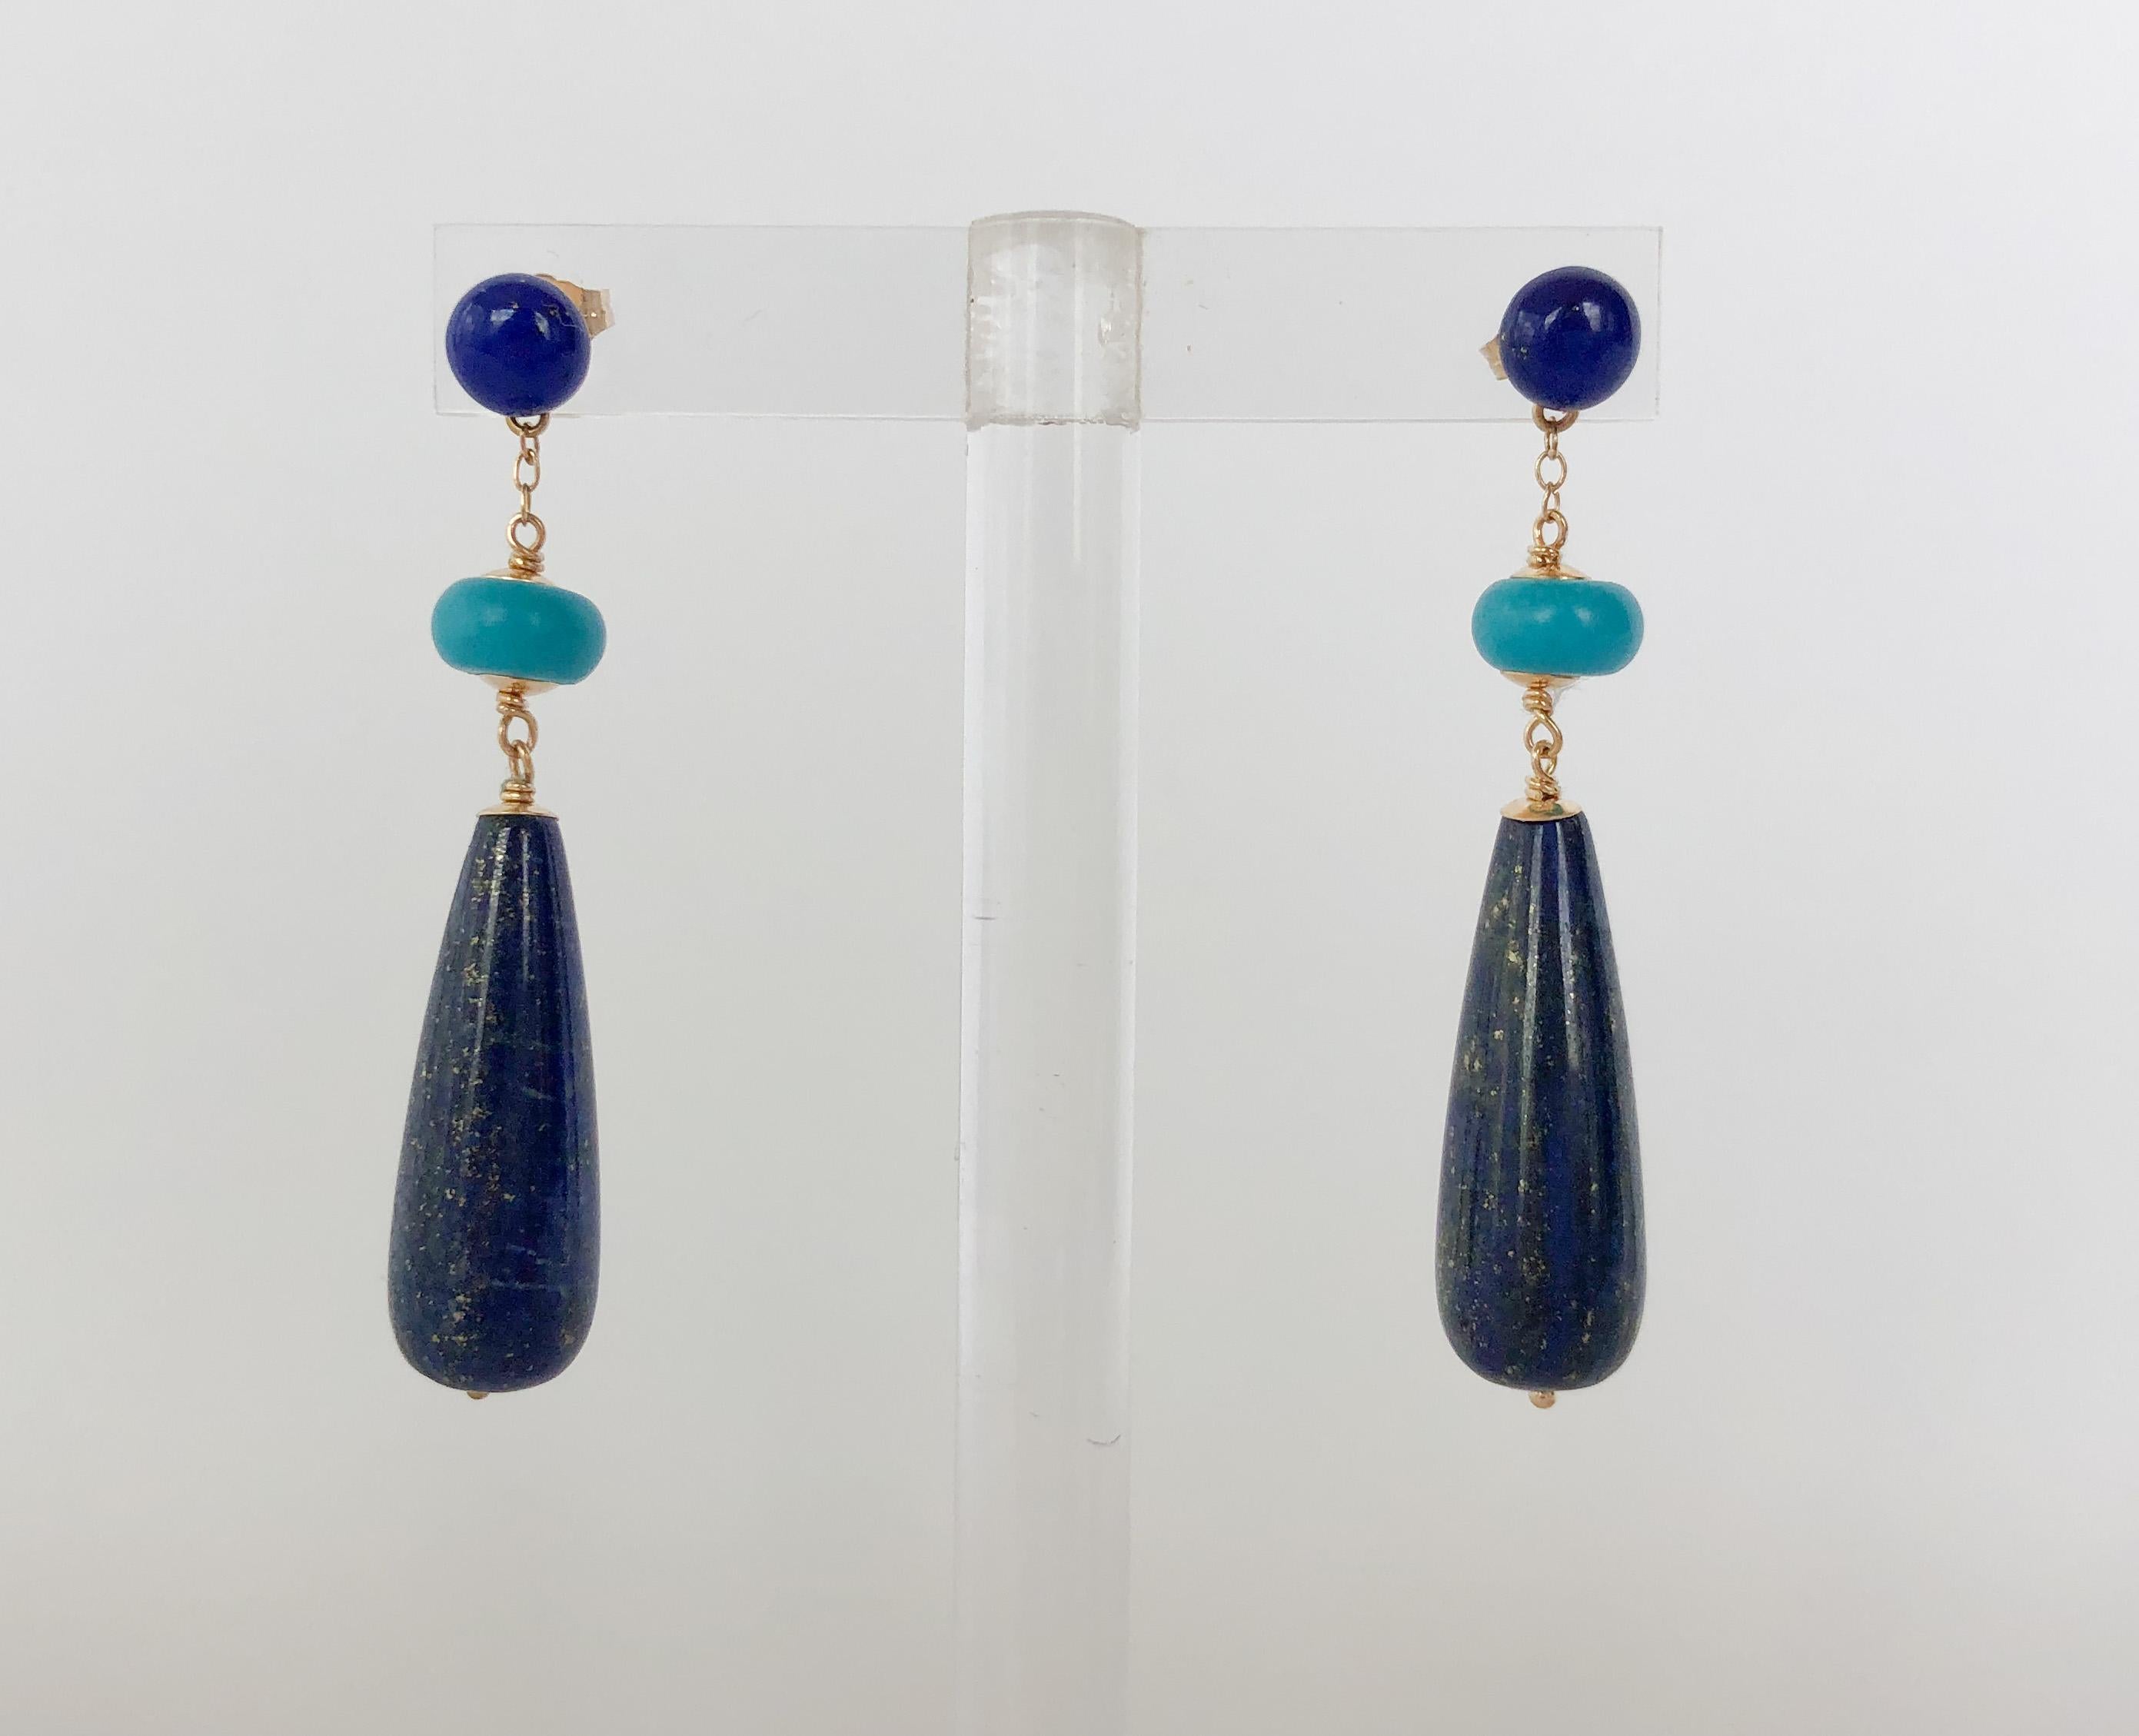 These eye-catching earrings are a combination of studs and dangle earrings. The stud is made with a lapis lazuli bead, and attached to it is a turquoise bead and long lapis lazuli bead. The wiring and earring post are made of 14k gold and have a